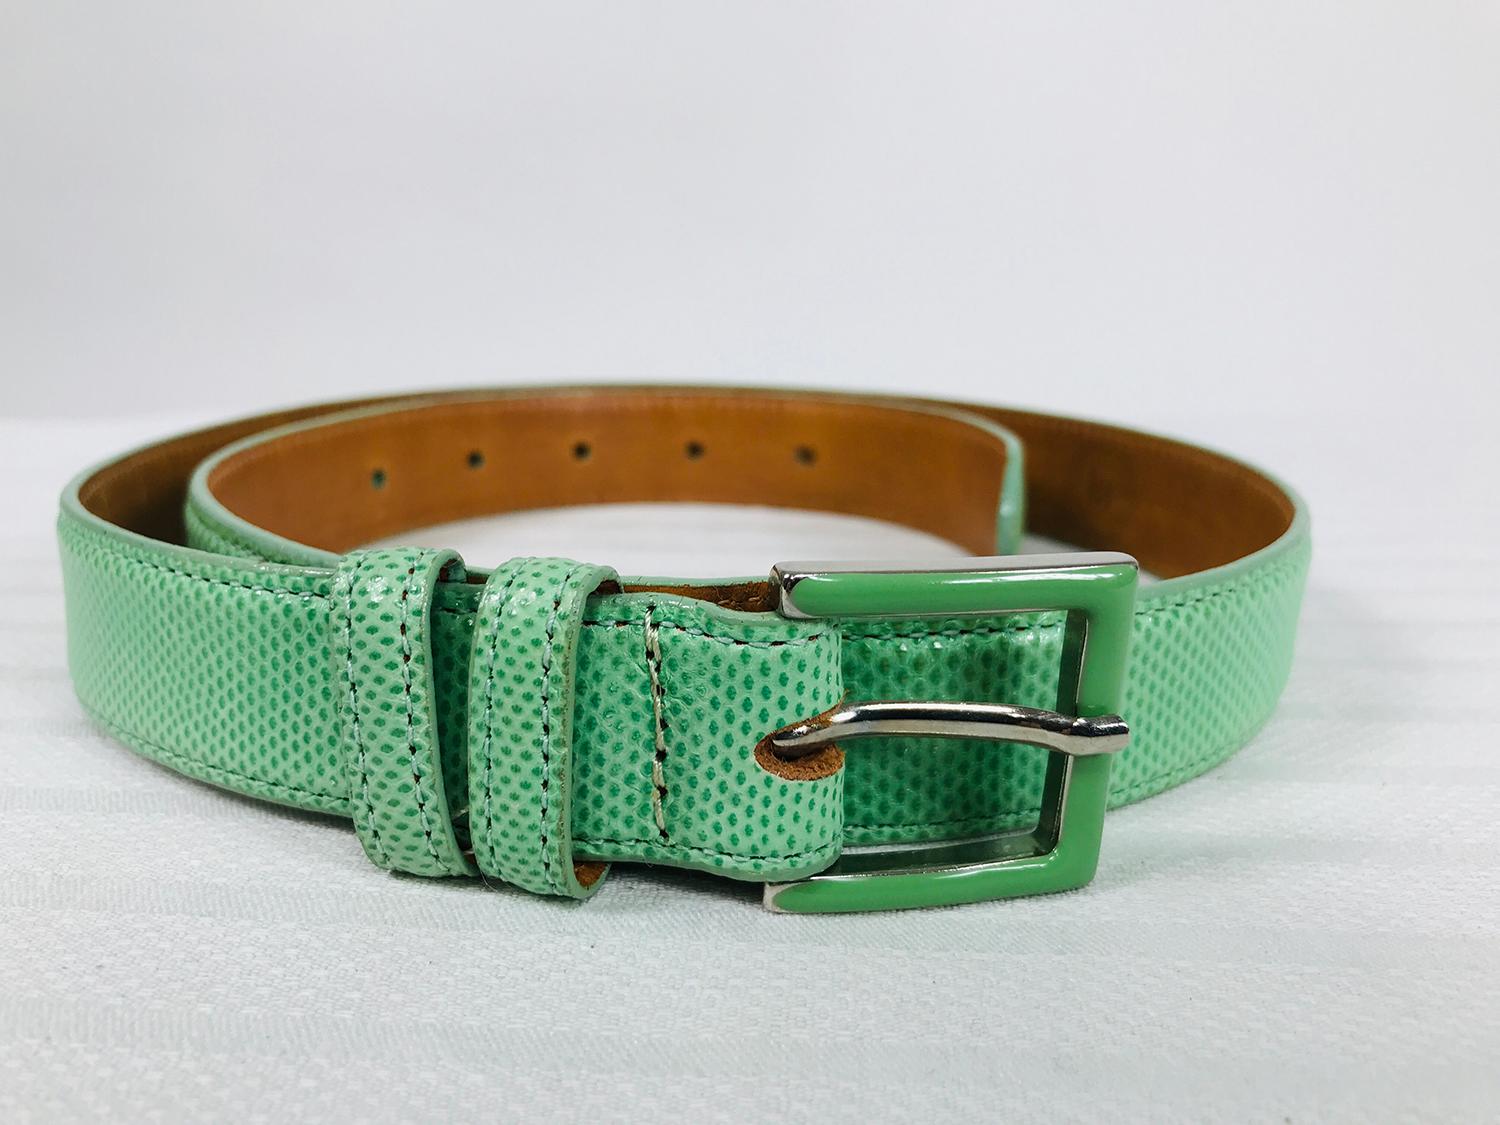 Lai Green Lizard Belt with Blue Enamel & Silver Metal Buckle Medium In Good Condition For Sale In West Palm Beach, FL